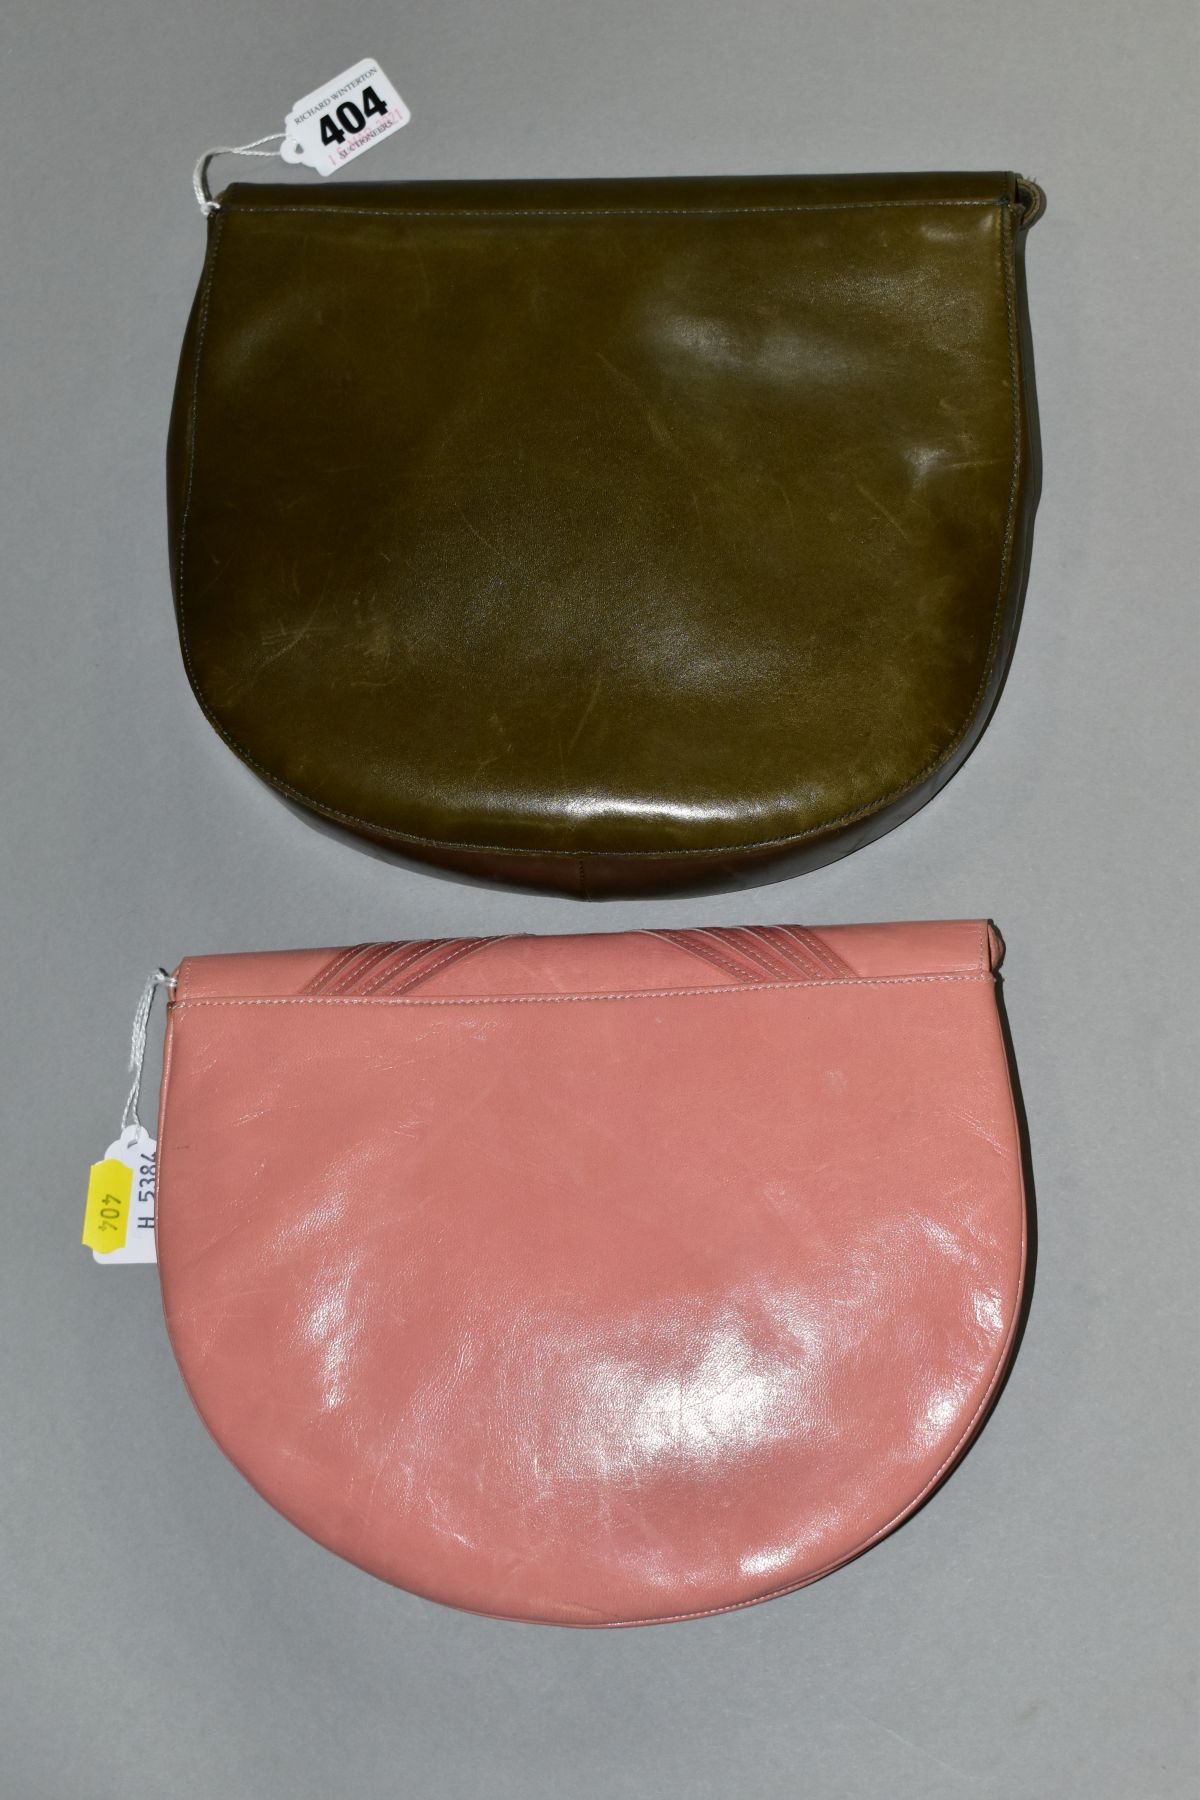 TWO CHARLES JOURDAN LEATHER HANDBAGS, one in pink with 55cm shoulder strap, the other in green - Image 2 of 4